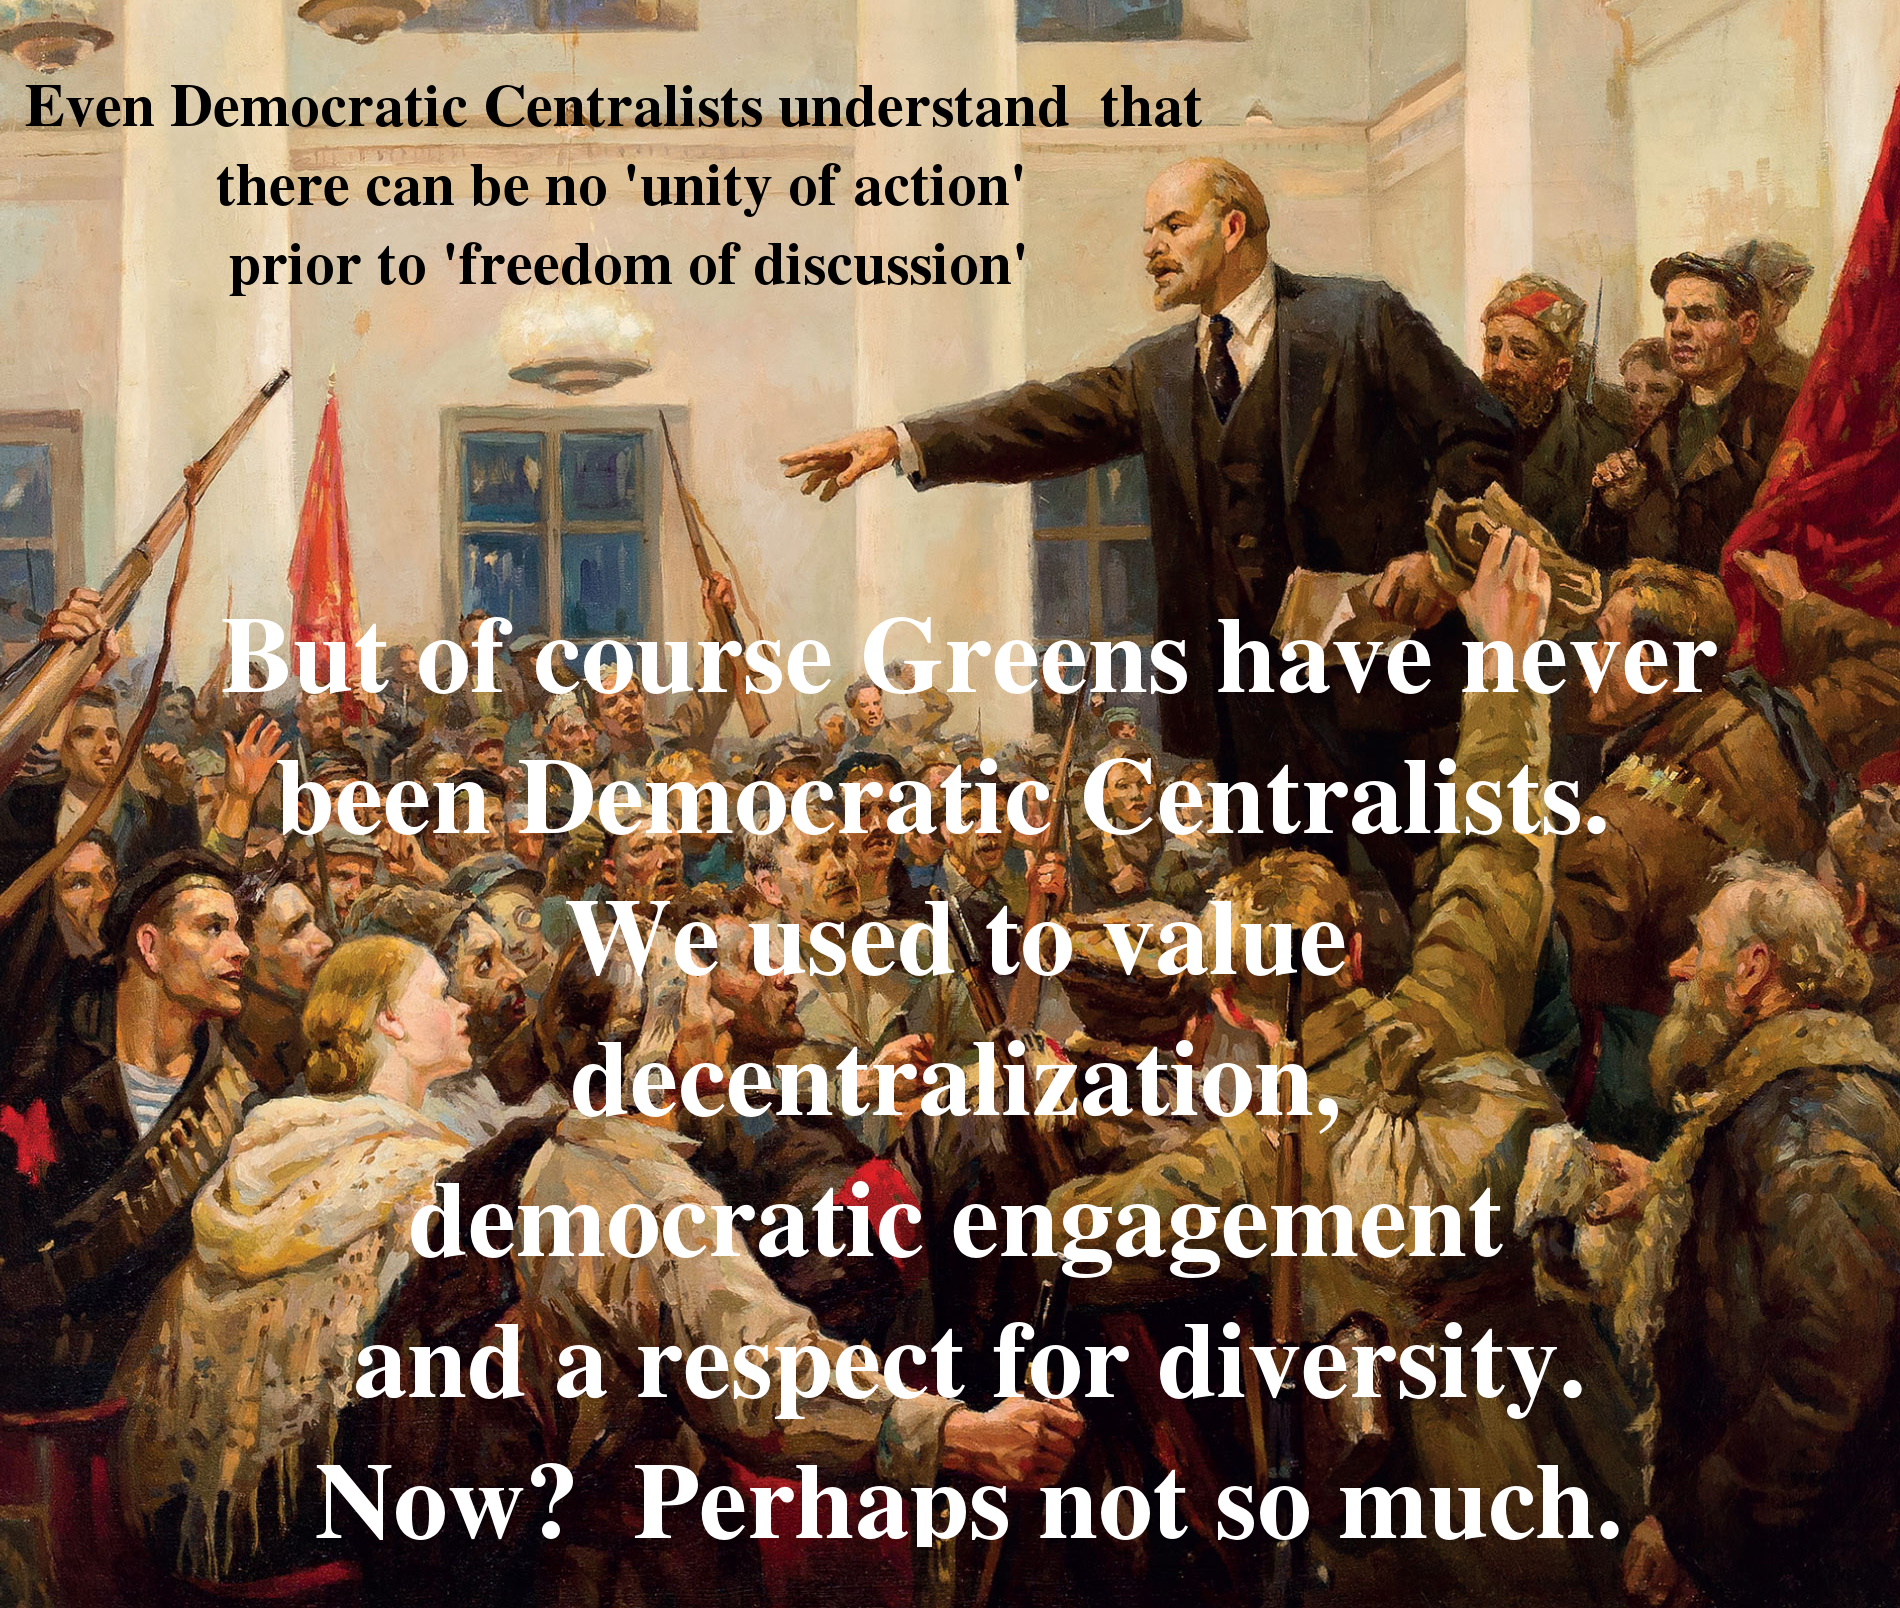 Greens are not, have never been Democratic Centralists.